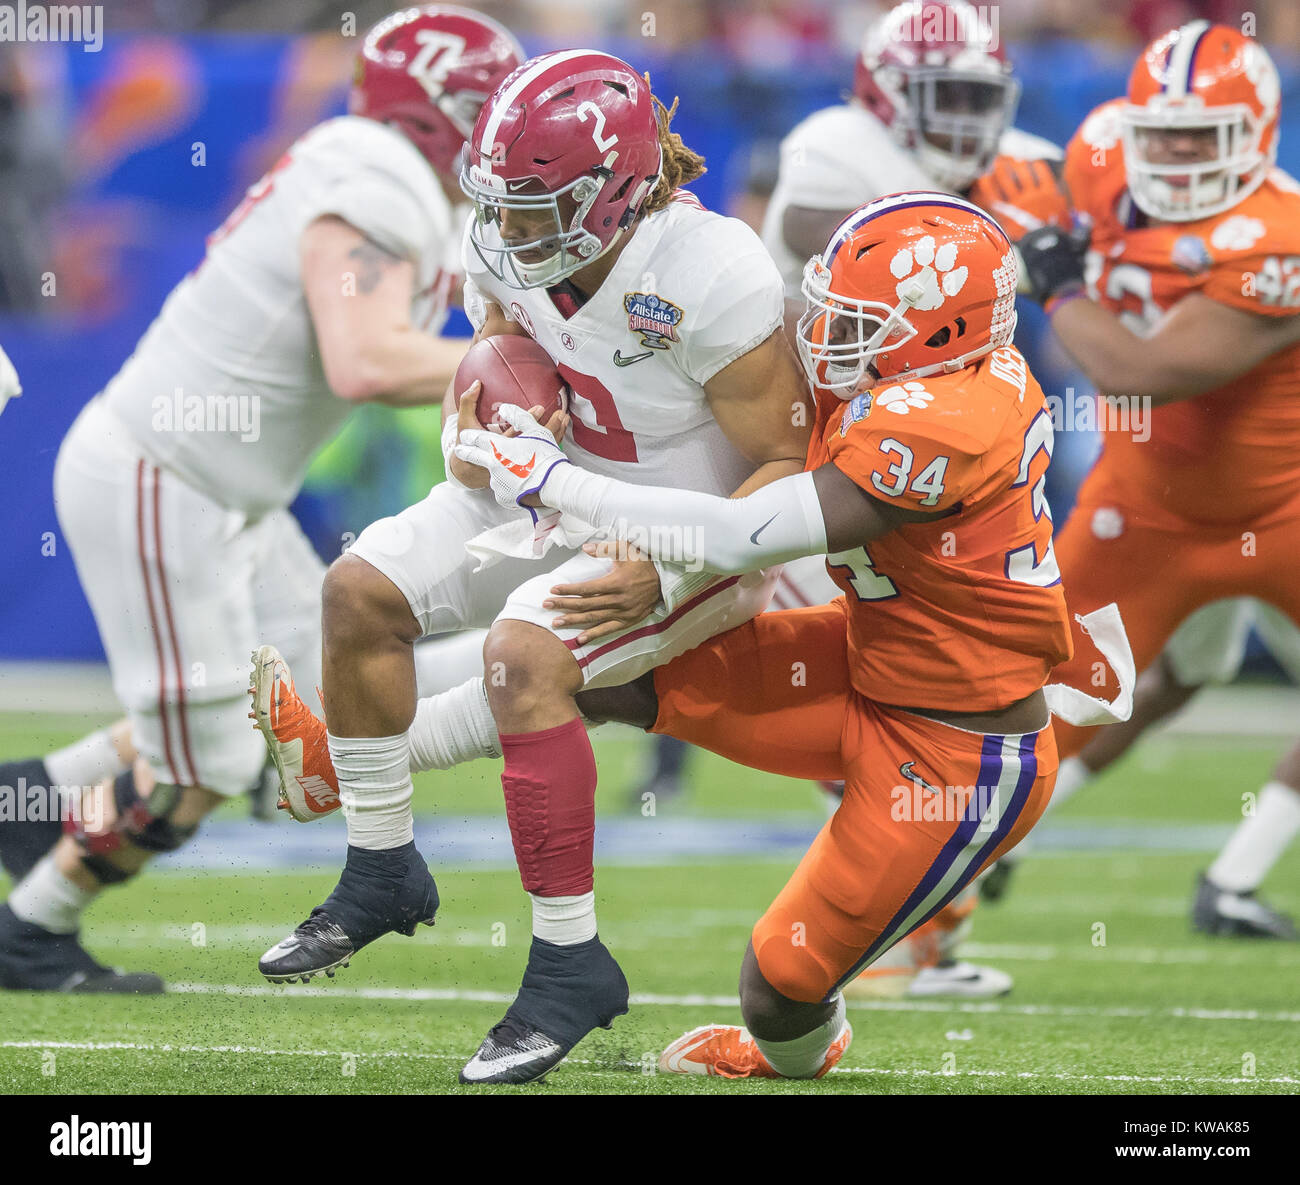 New Orleans, LA, USA. 1st Jan, 2018. Alabama's Jalen Hurts #2 is tackled by Clemson's Kendall Joseph #34 during the Allstate Sugar Bowl football game between the Clemson Tigers and the Alabama Crimson Tide at the Mercedes-Benz Supedome in New Orleans, LA. Kyle Okita/CSM/Alamy Live News Stock Photo